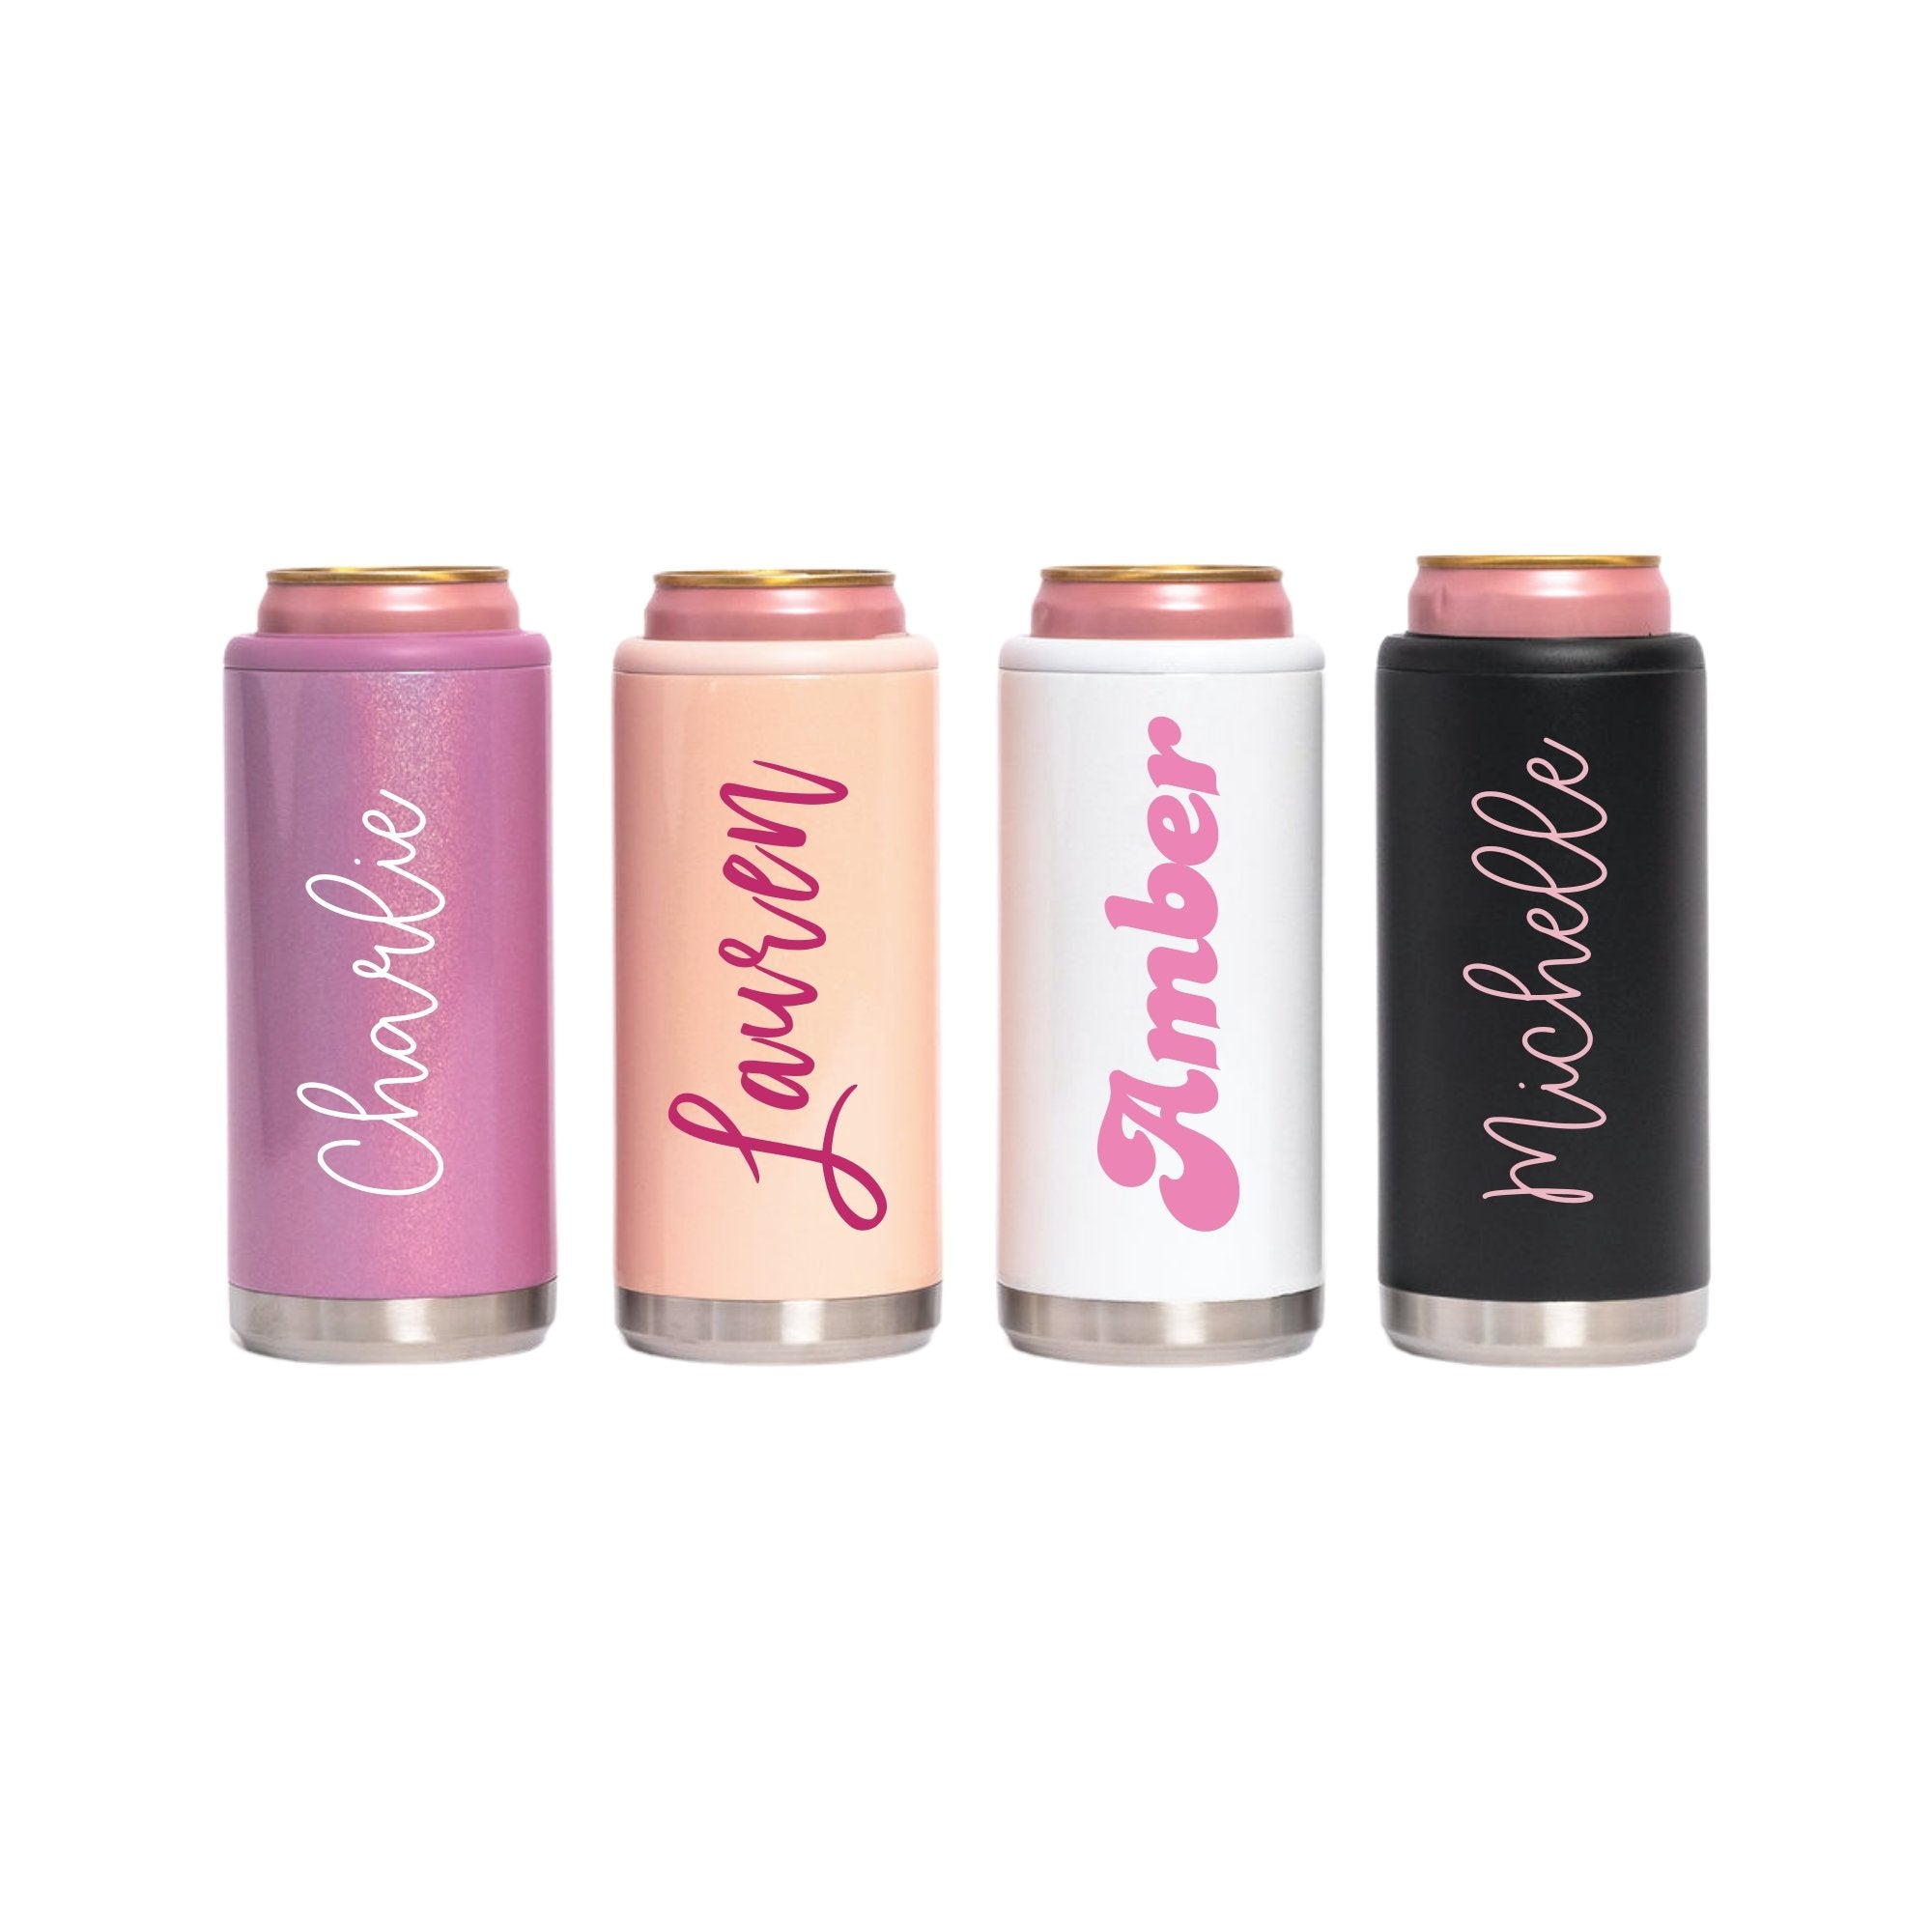 Custom Name Can Cooler - Sprinkled With Pink #bachelorette #custom #gifts